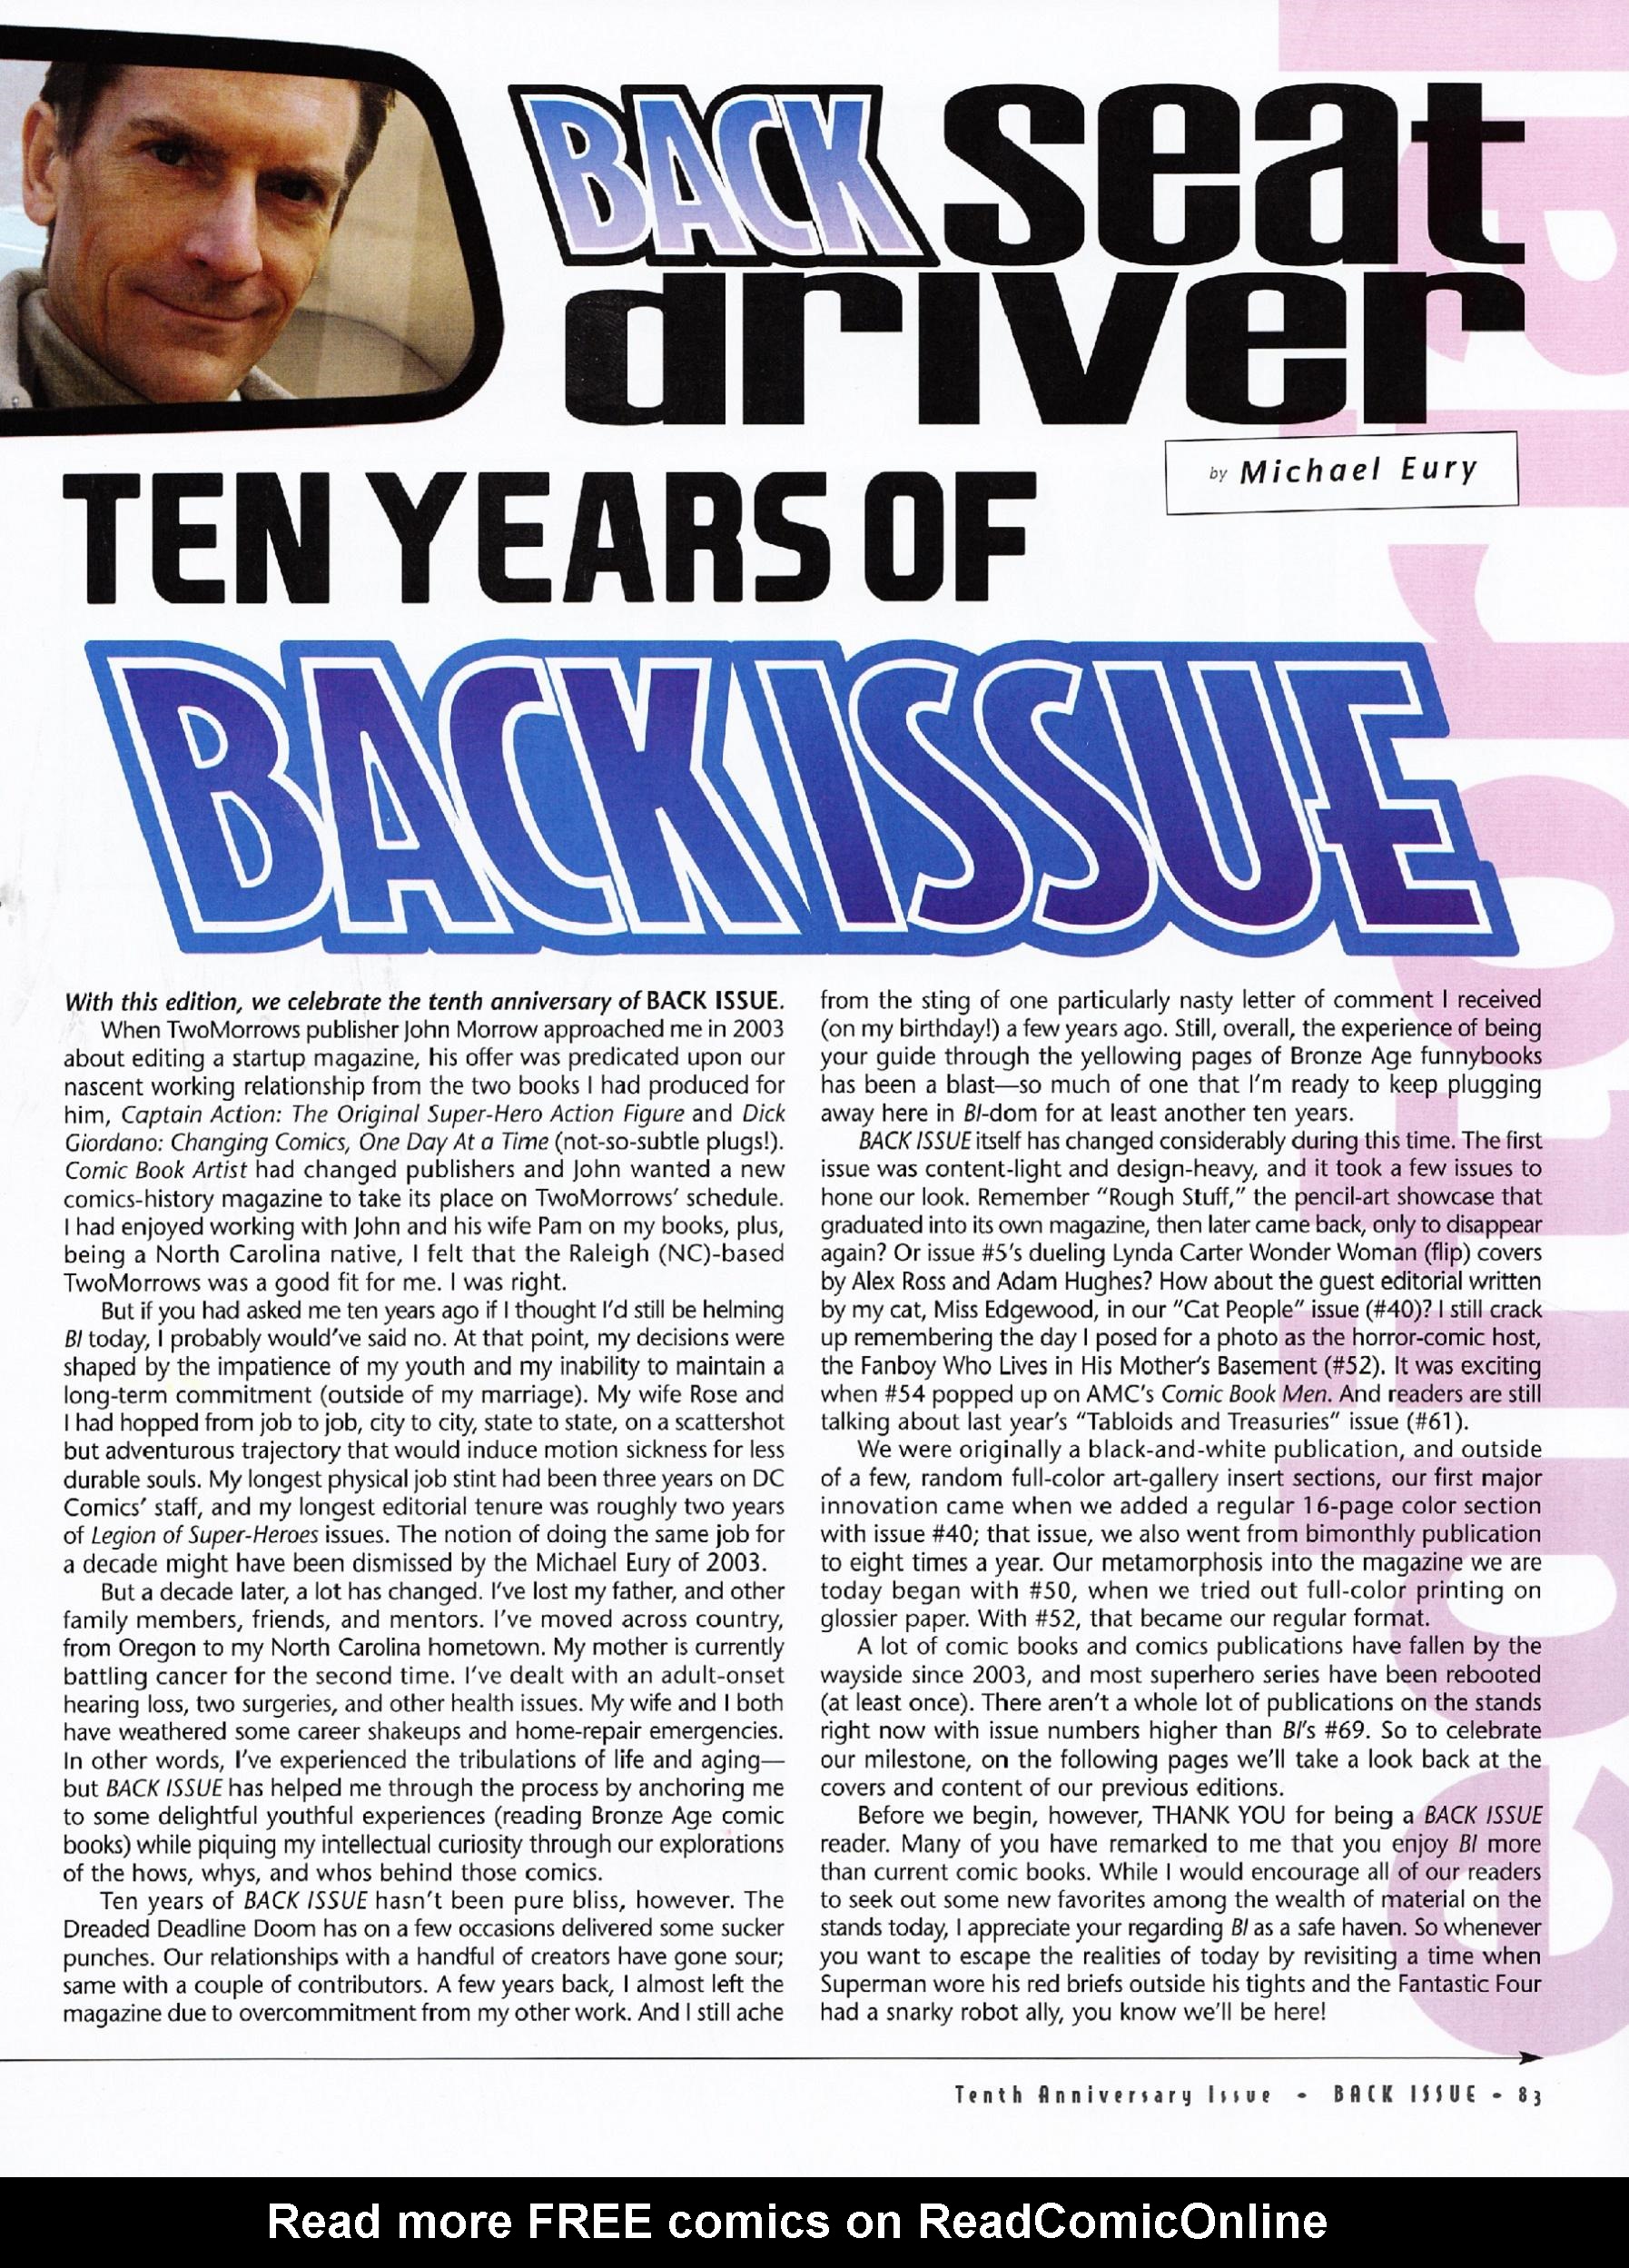 Read online Back Issue comic -  Issue #69 - 84